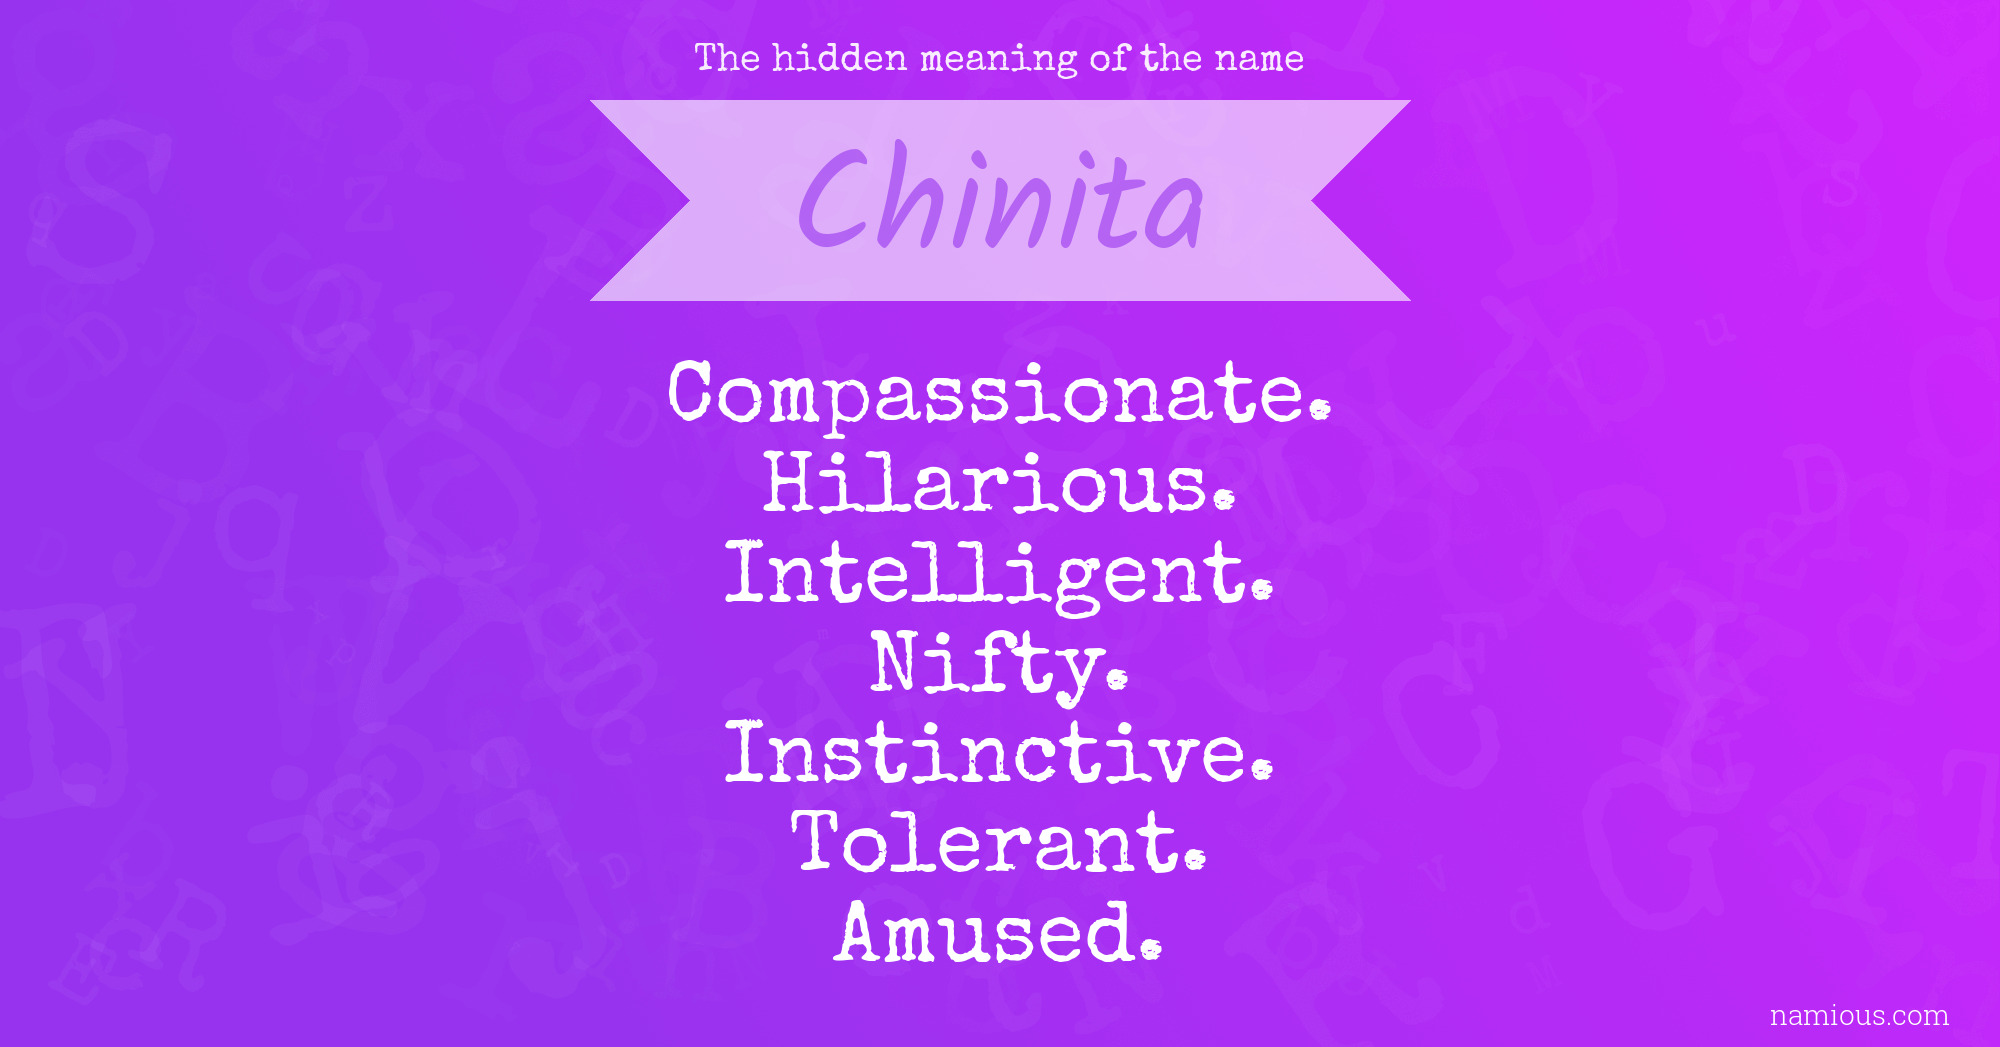 The hidden meaning of the name Chinita